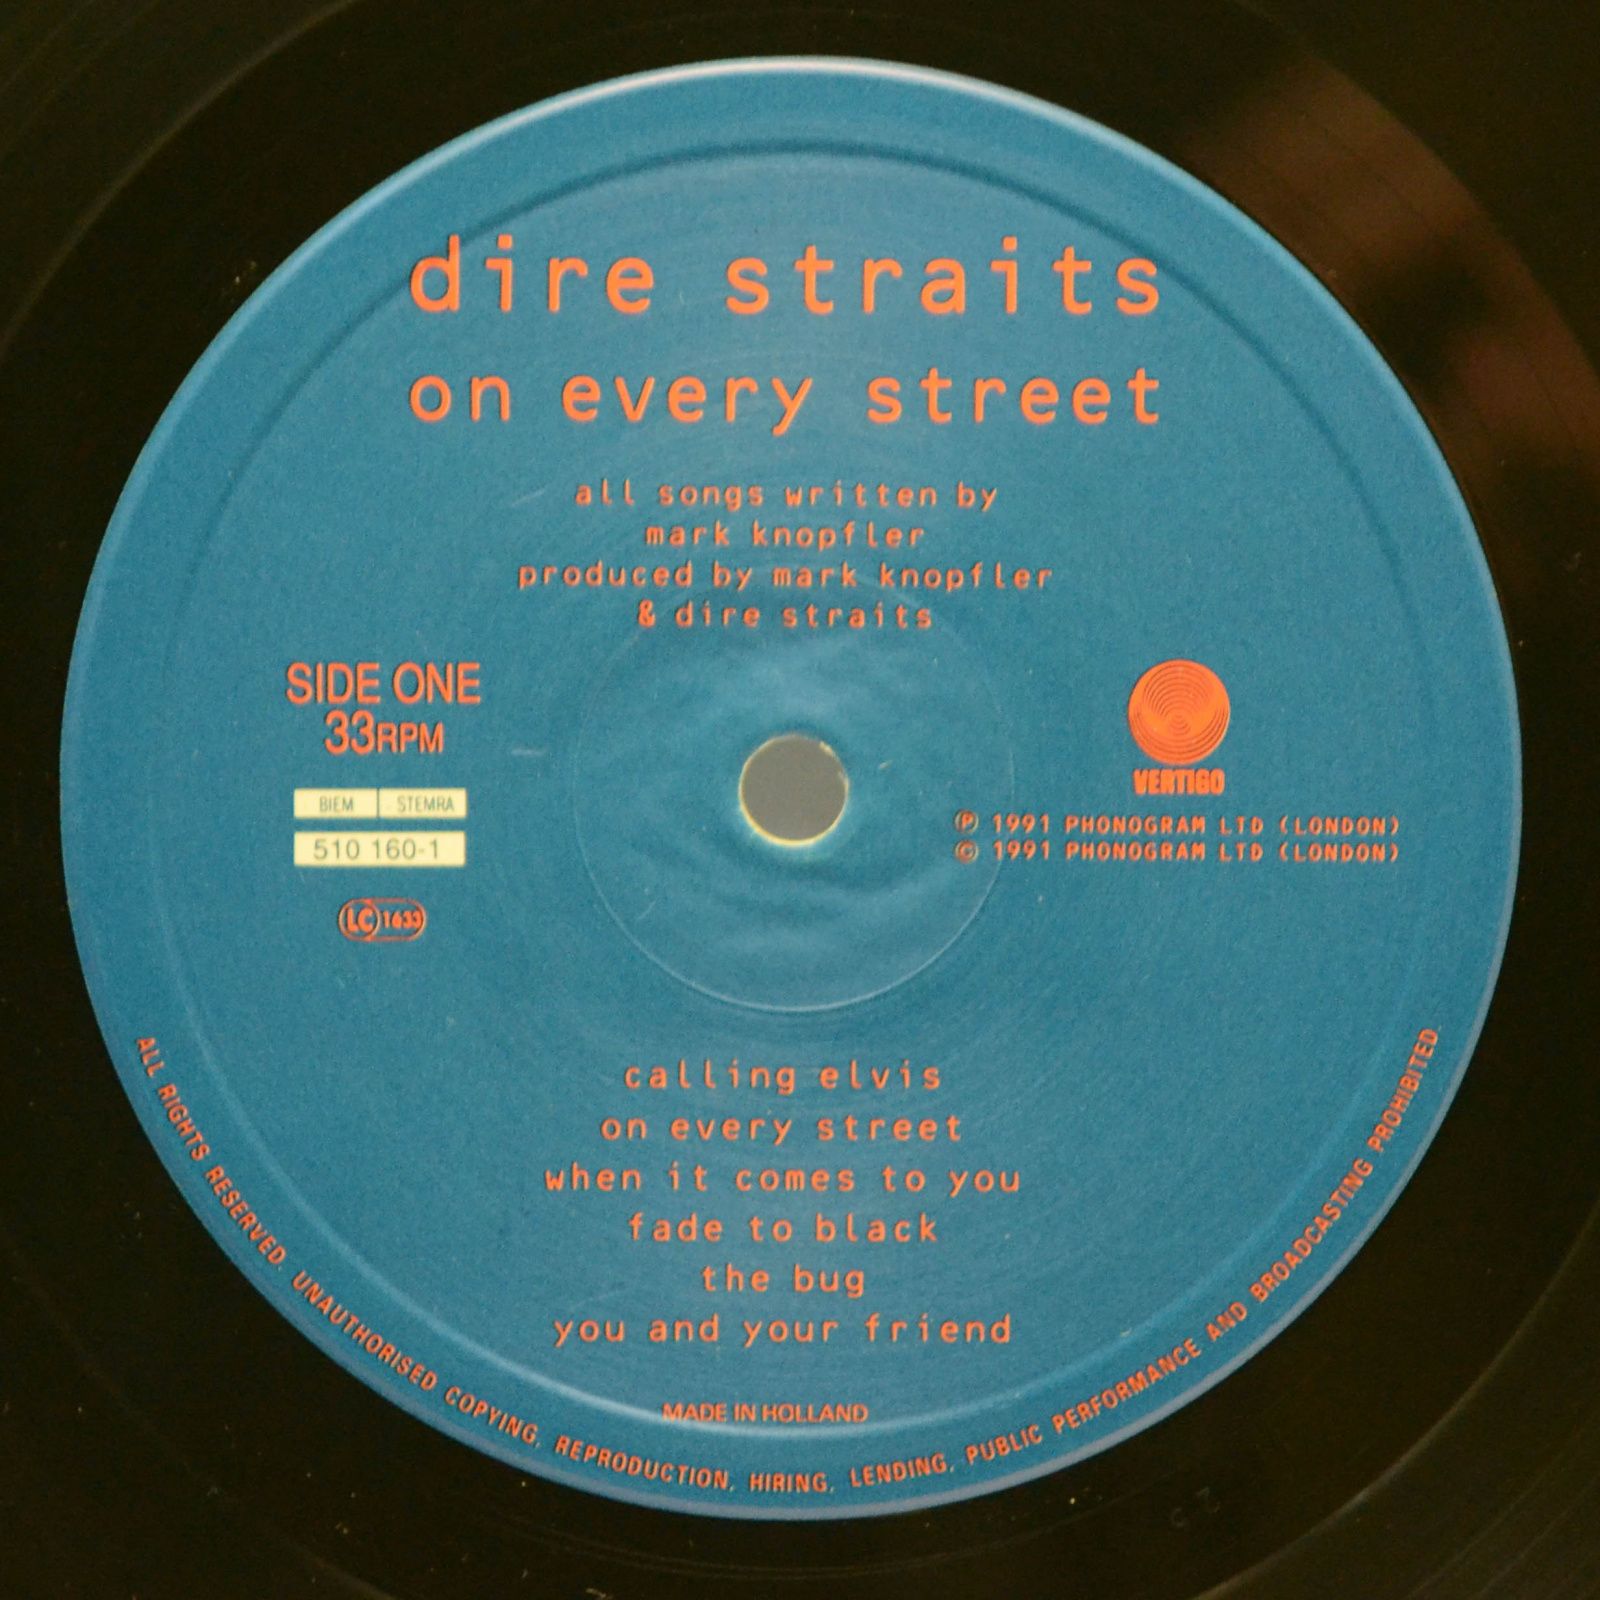 Dire Straits — On Every Street, 1991